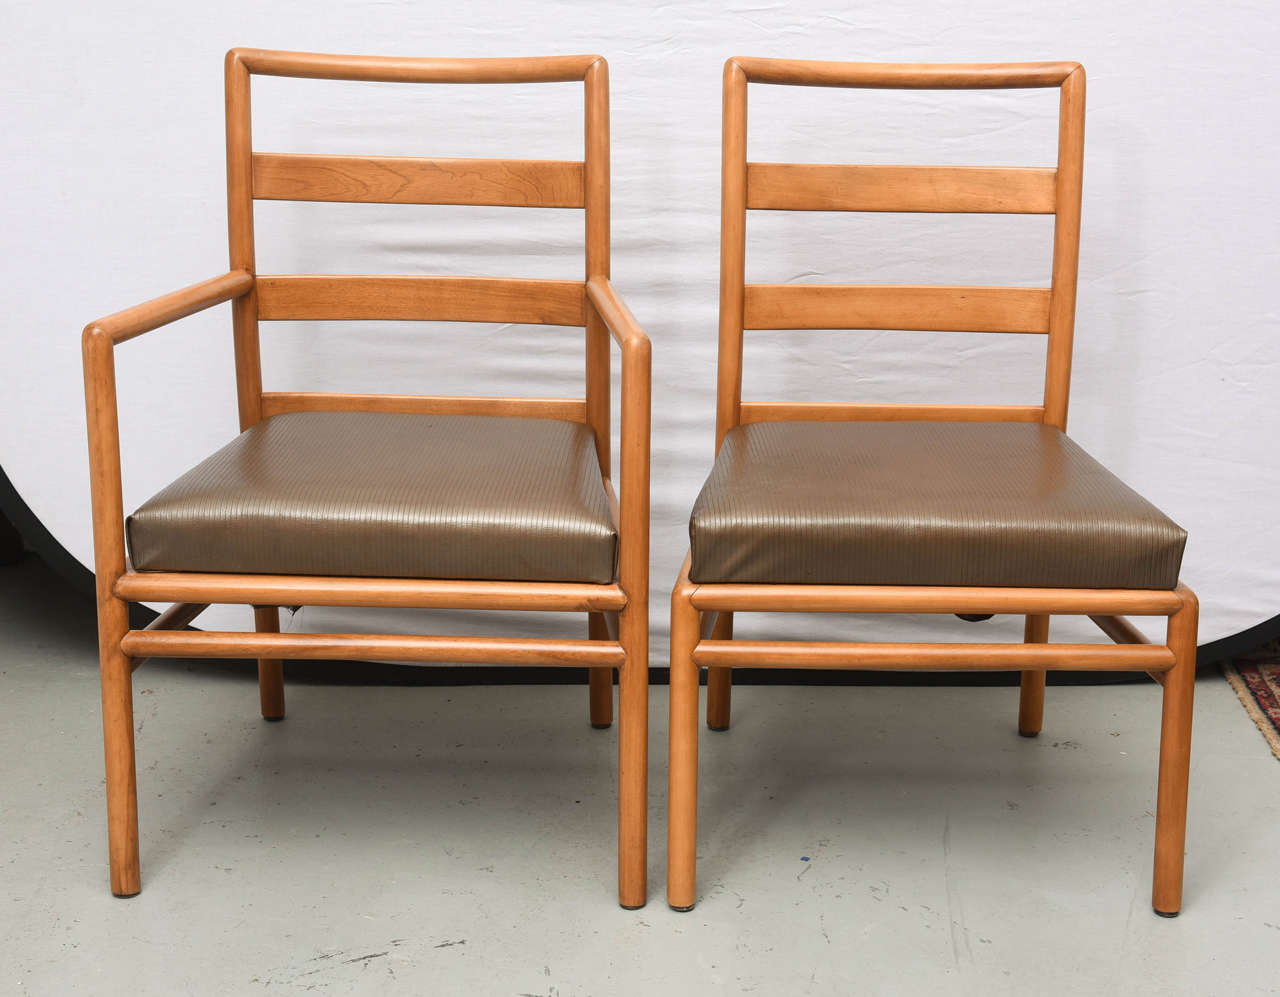 Gorgeous restored ladder back chairs by Robsjohn Gibbings for Widdicomb in Walnut. 2 arm chairs and 6 without arms.  1950s USA